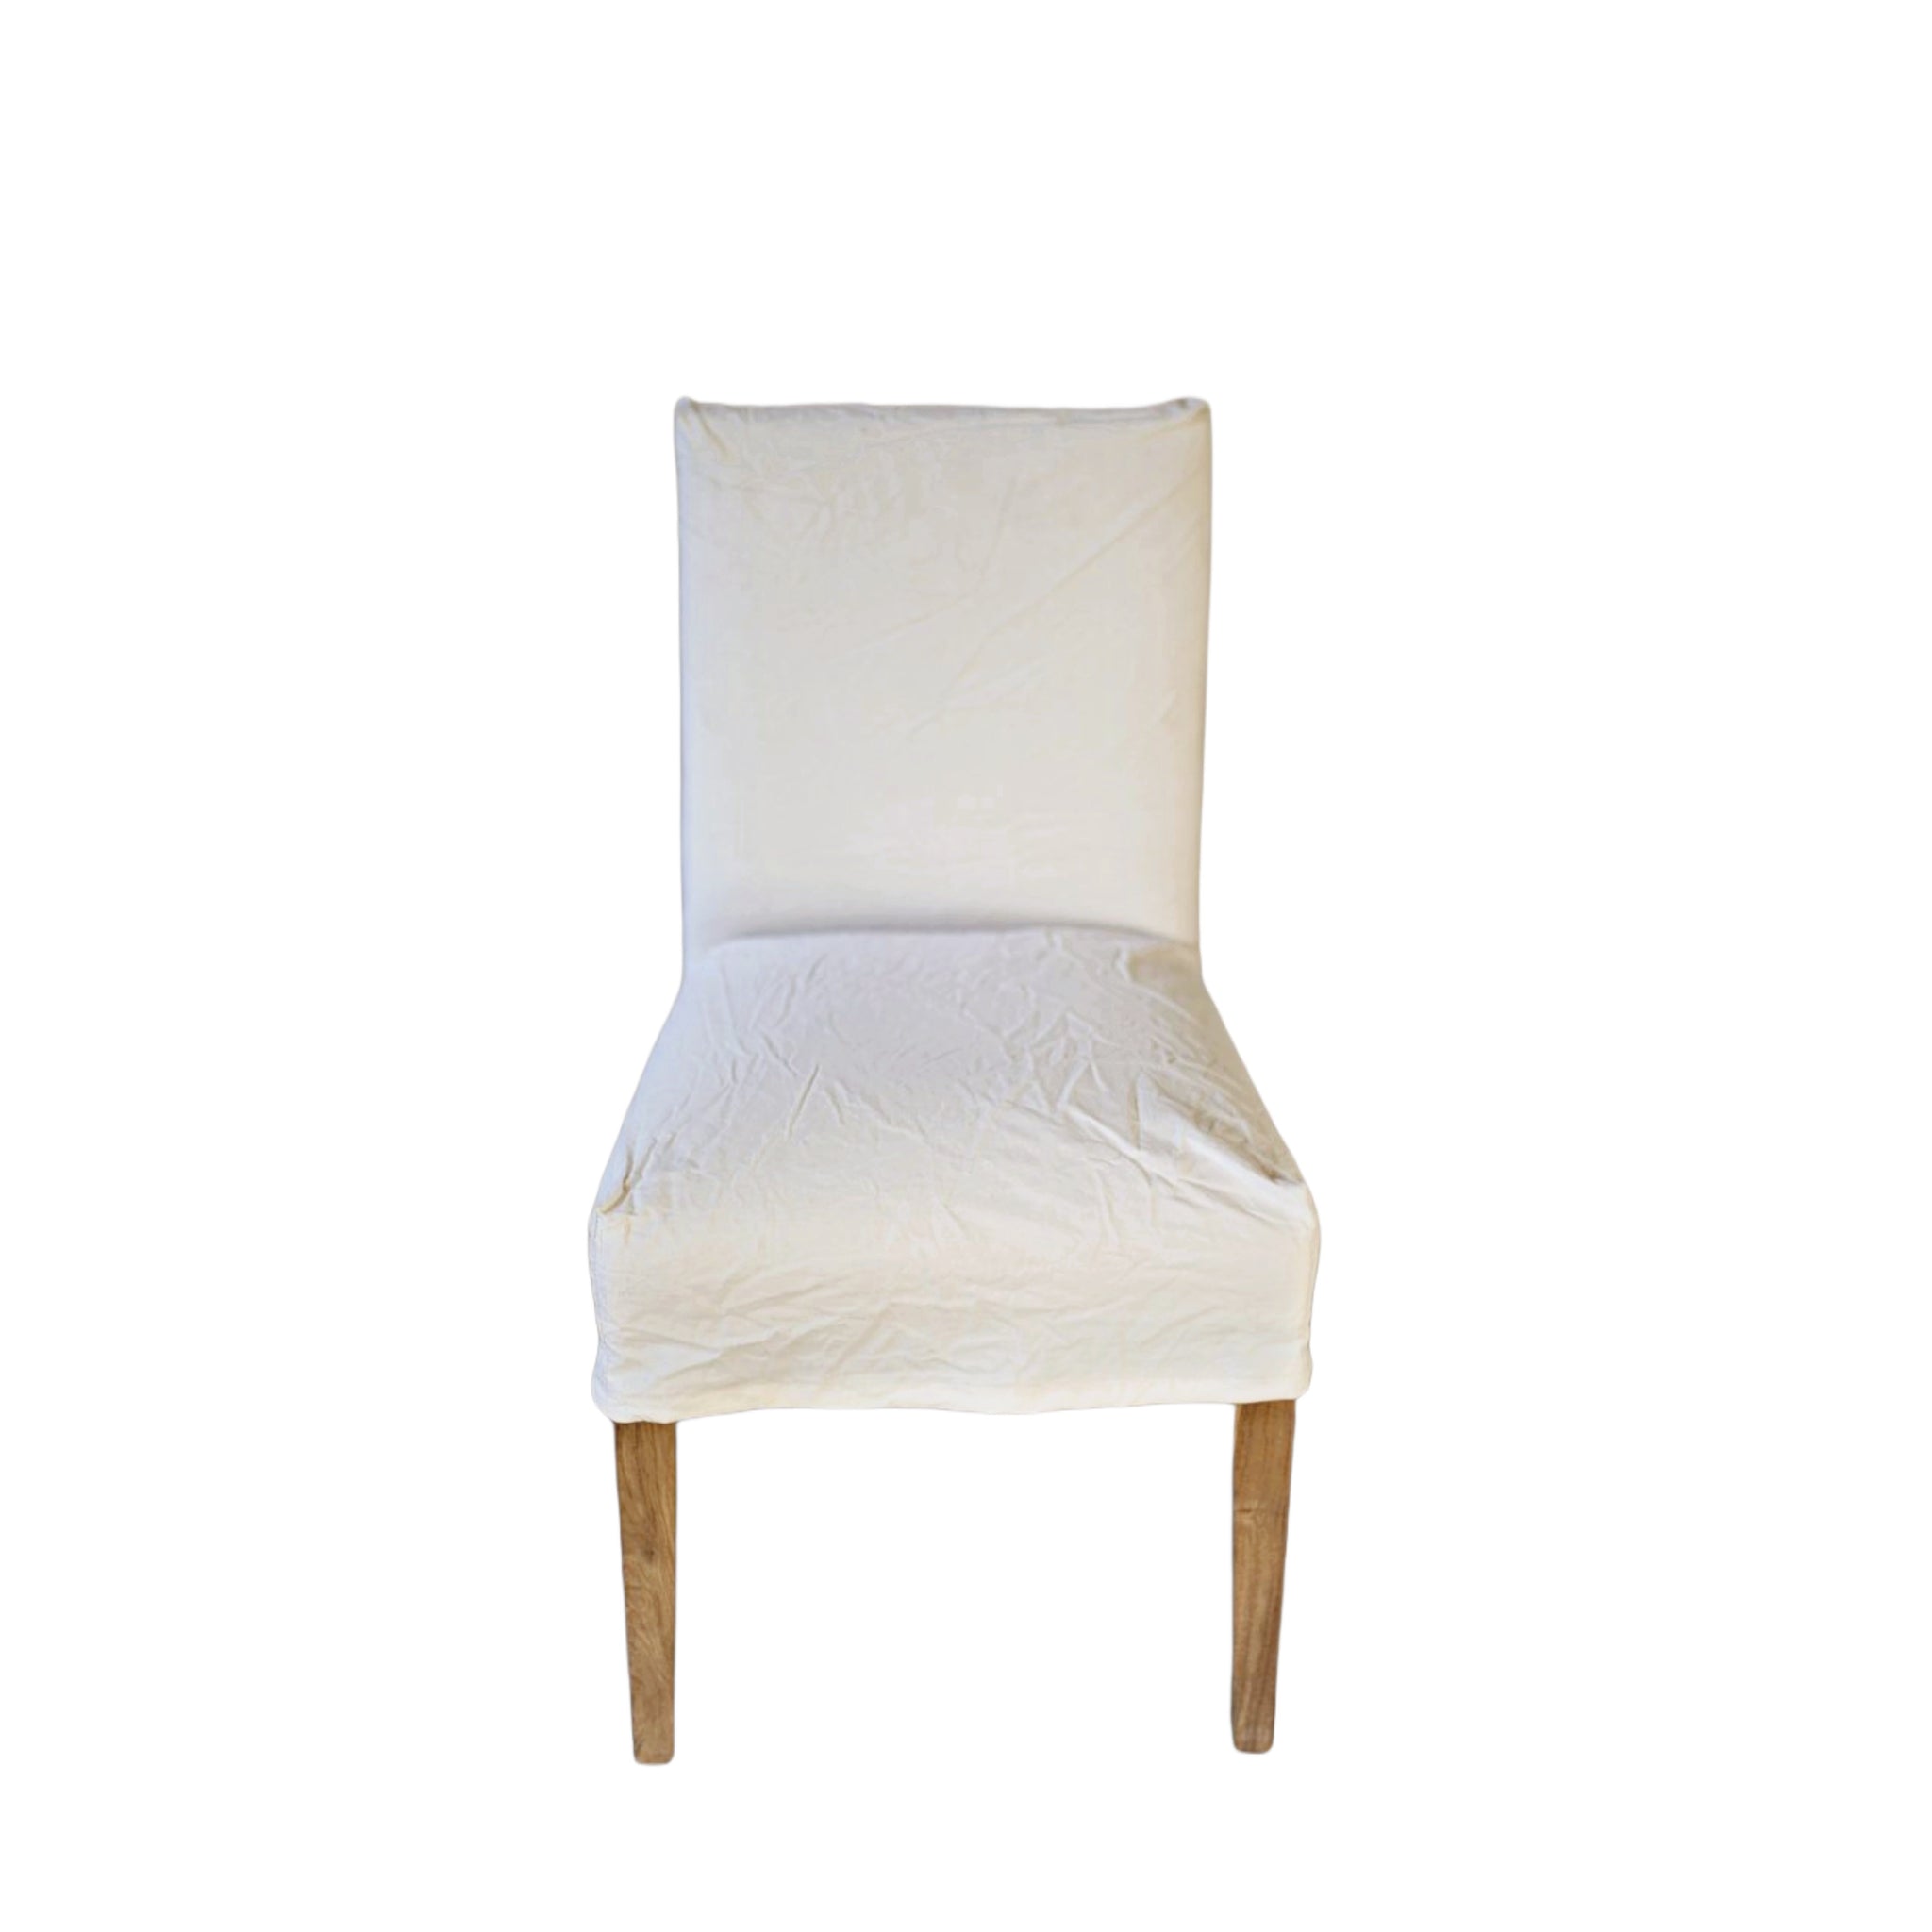 TANA CHAIR TWO IN ONE. BASE UPHOLSTERY + LINING